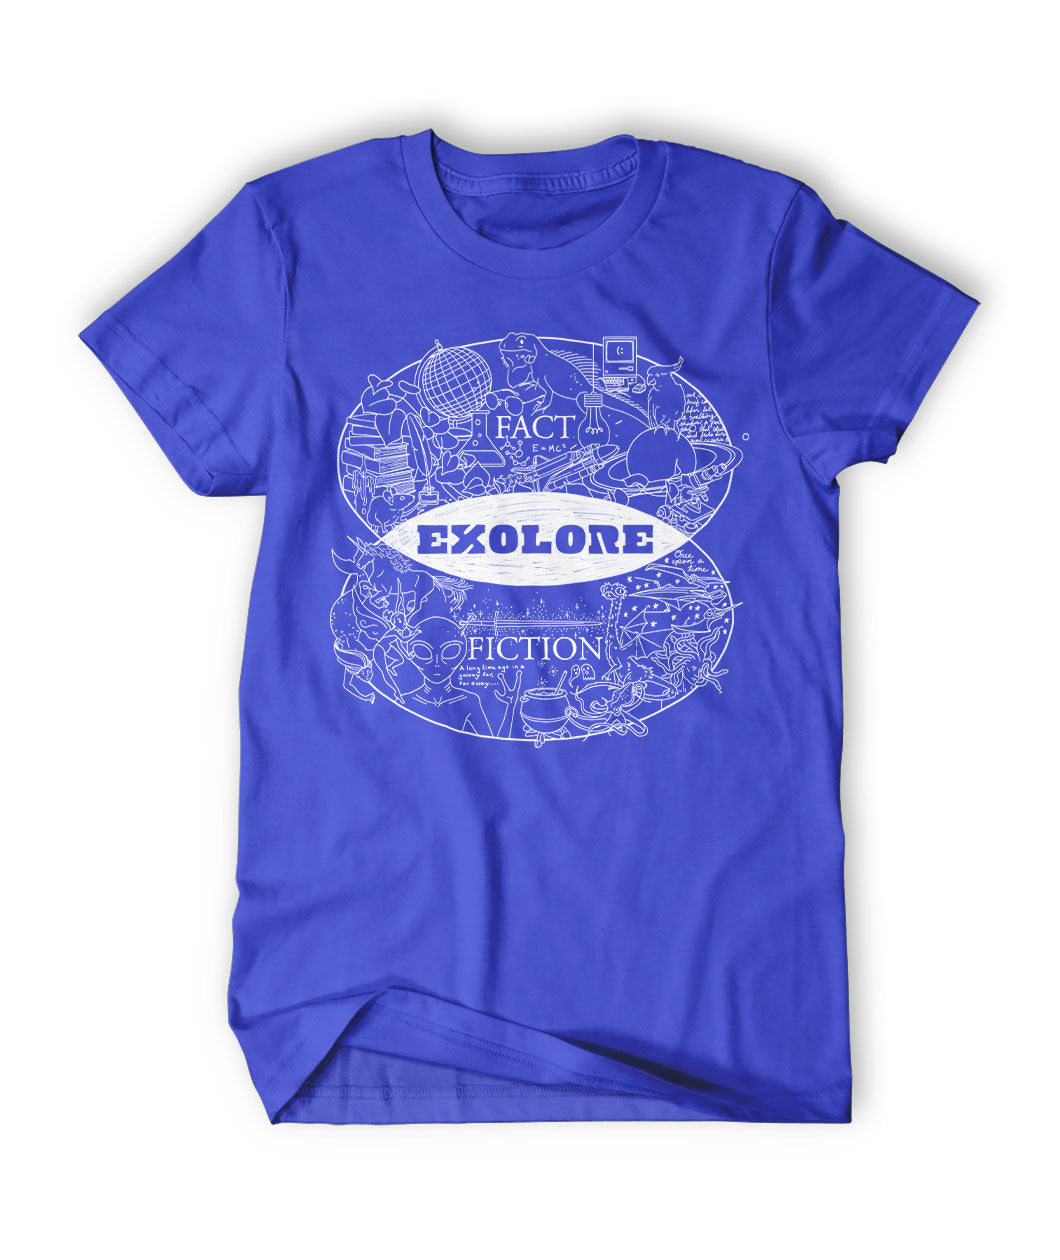 Blue shirt showing a venn diagram with the top half saying "fact" showing images of science and the bottom half of the diagram saying "fiction" with images of aliens and other fantastical creatures. In the intersection of the diagram is the word "Exolore".  